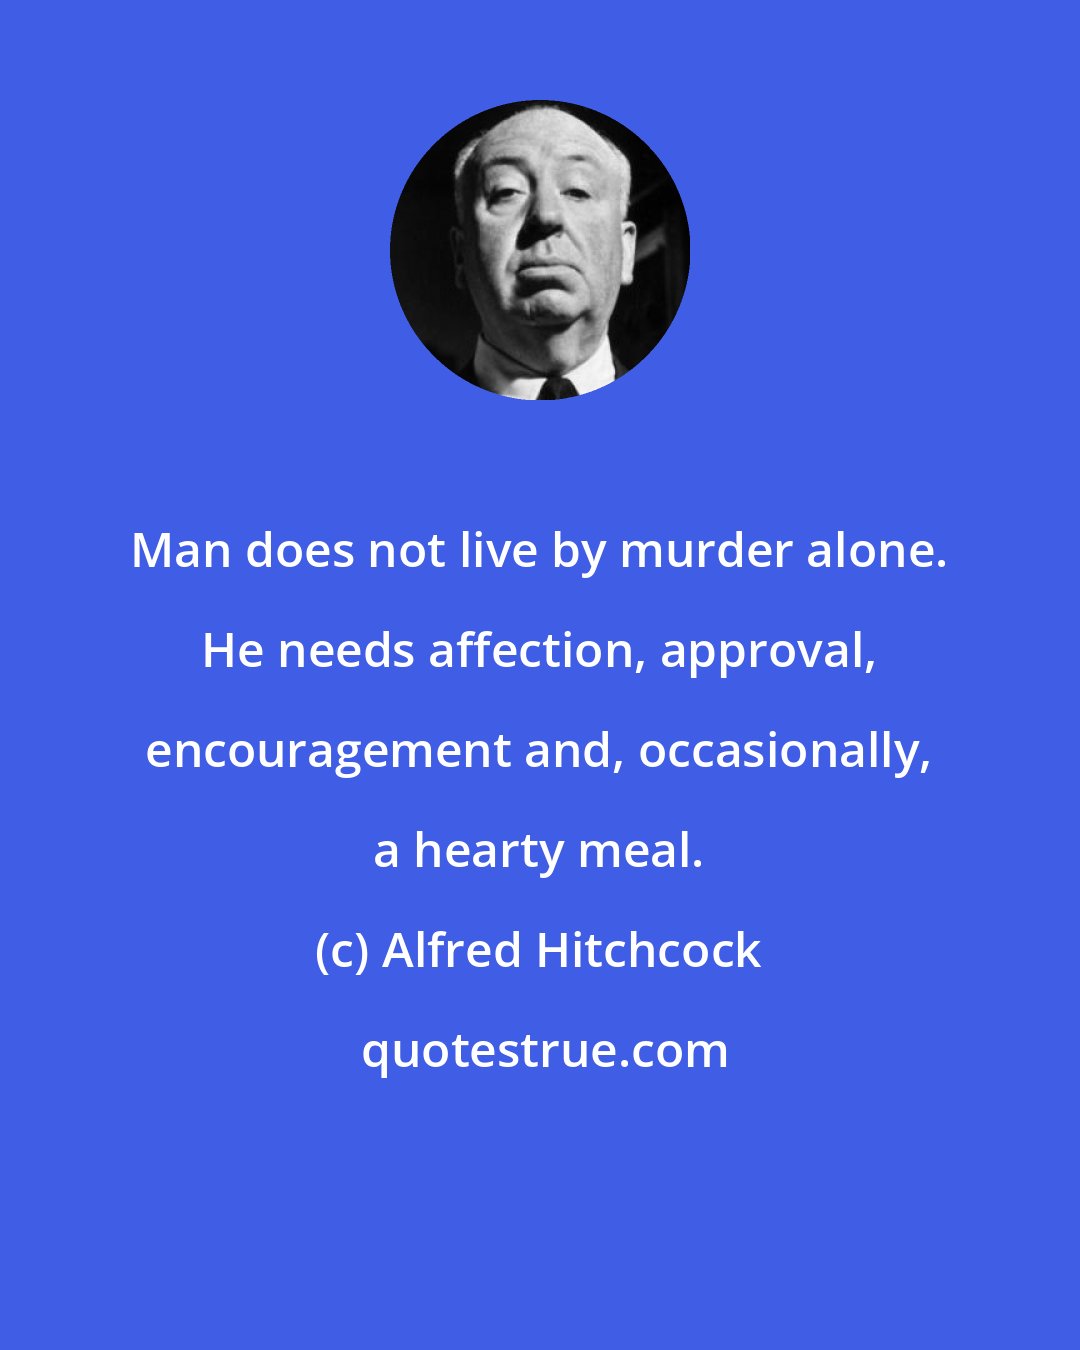 Alfred Hitchcock: Man does not live by murder alone. He needs affection, approval, encouragement and, occasionally, a hearty meal.